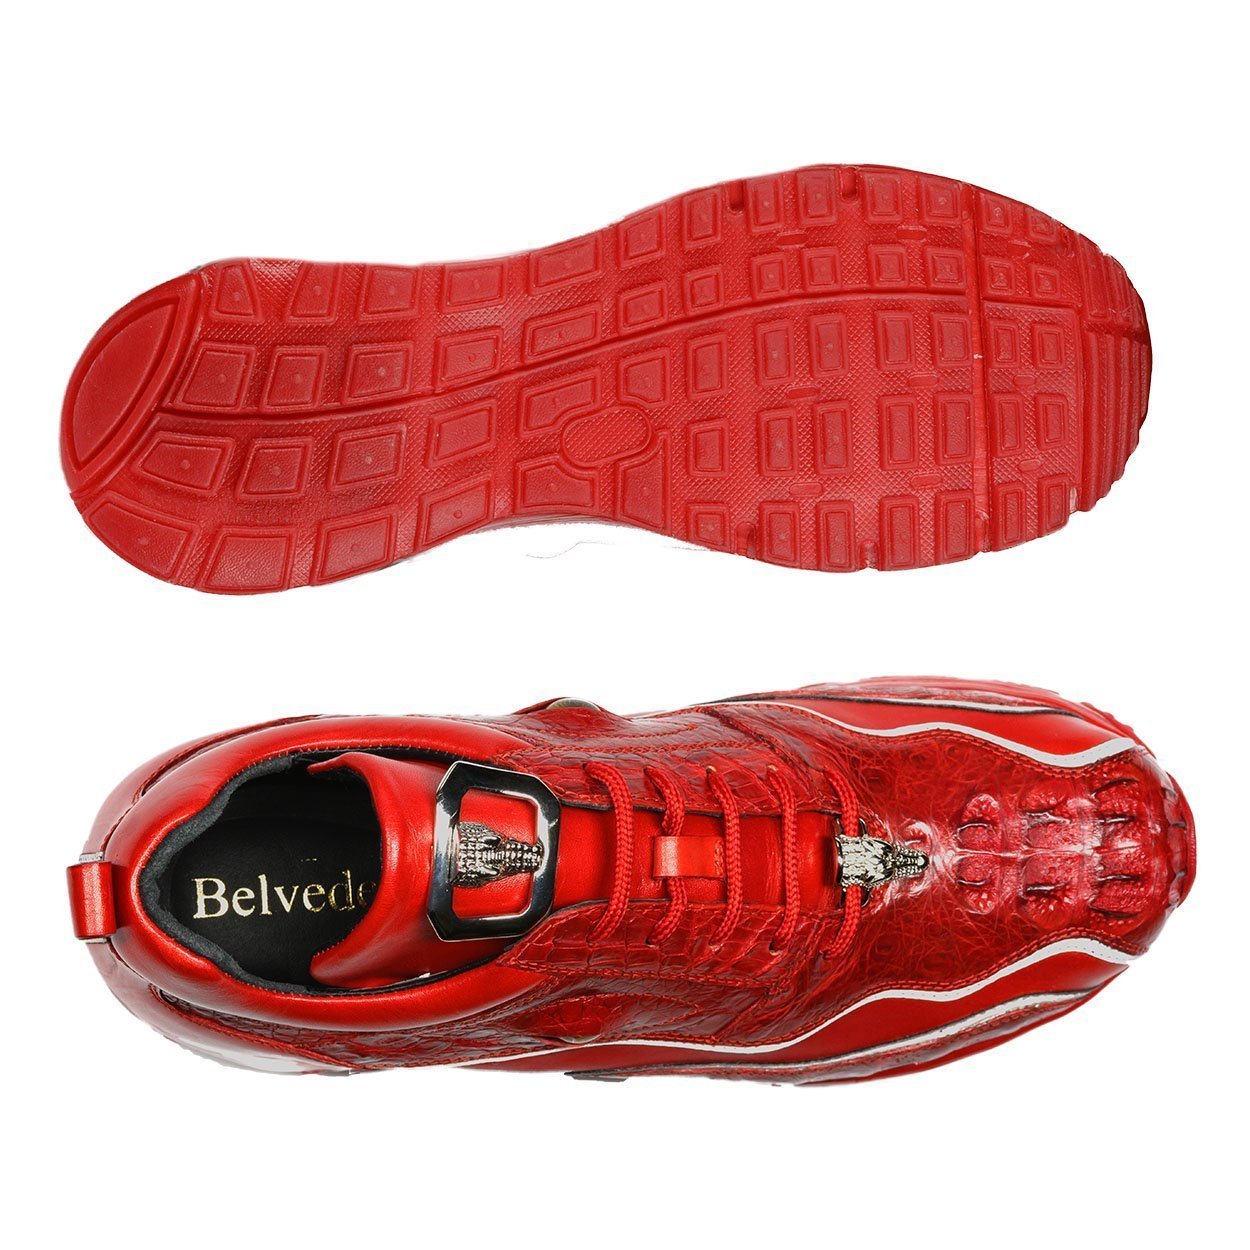 Top and bottom of Belvedere Red Crocodile and Calf-Skin Leather Casual Sneakers